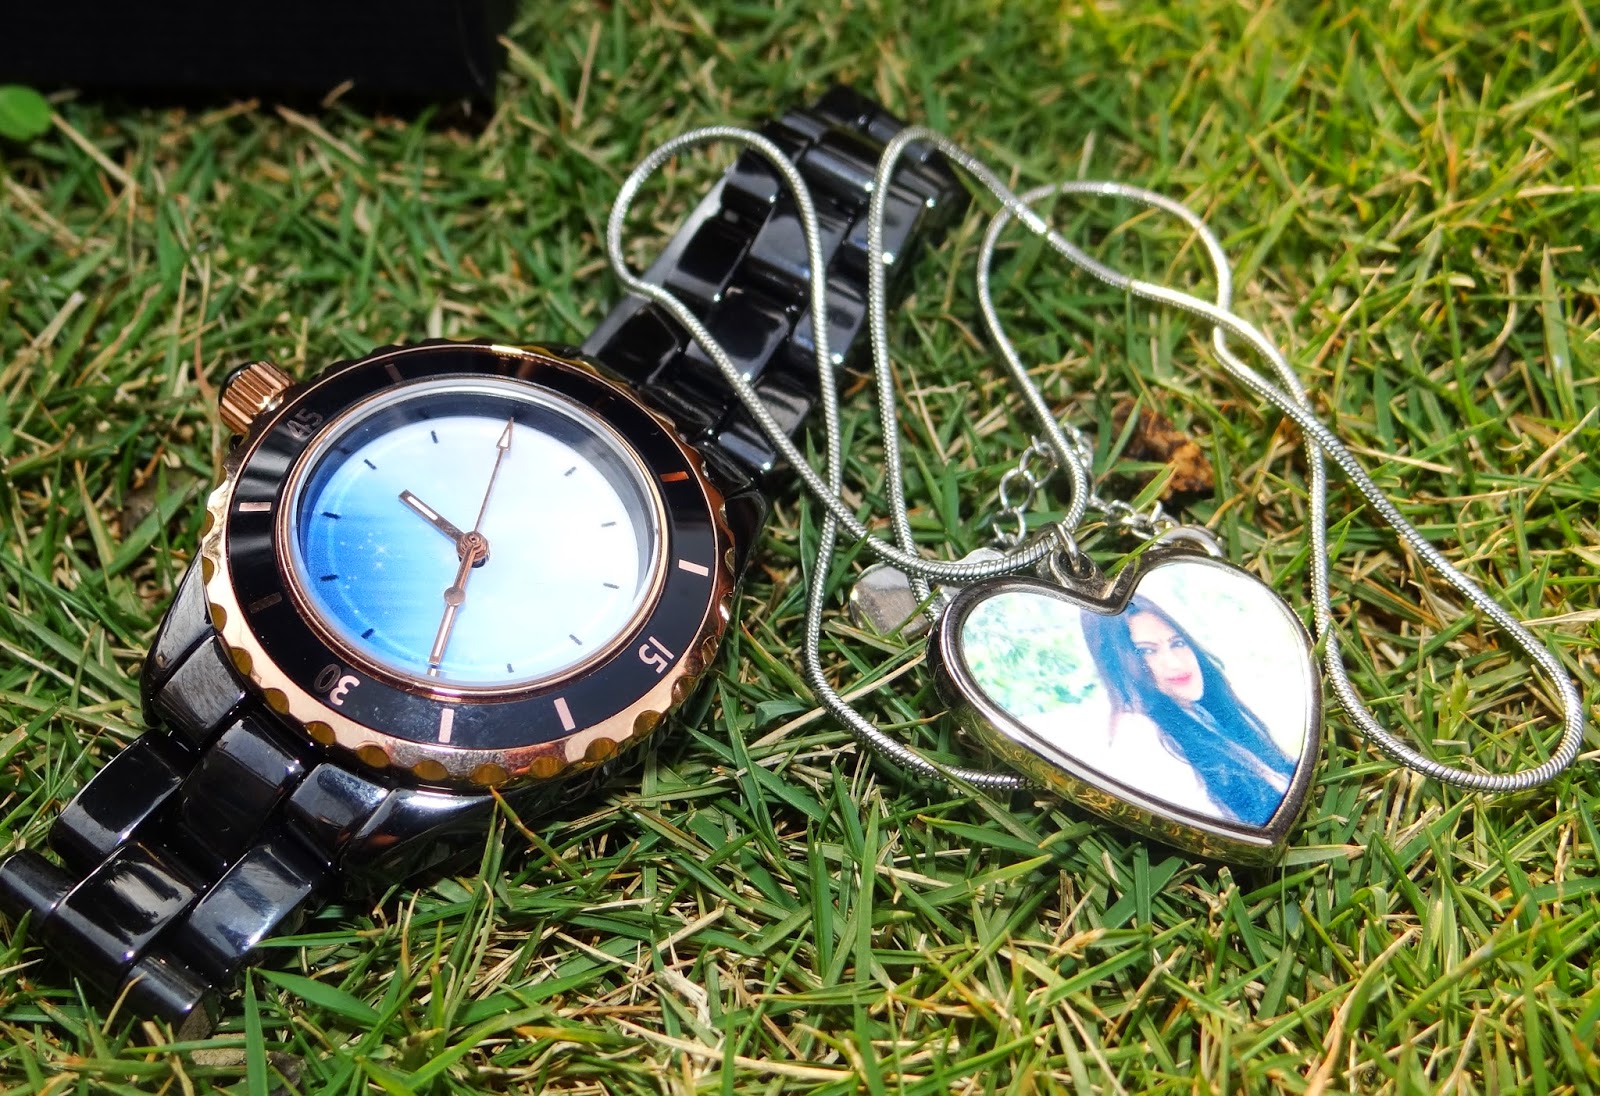 Personalized watch and necklace from Snapmade.com